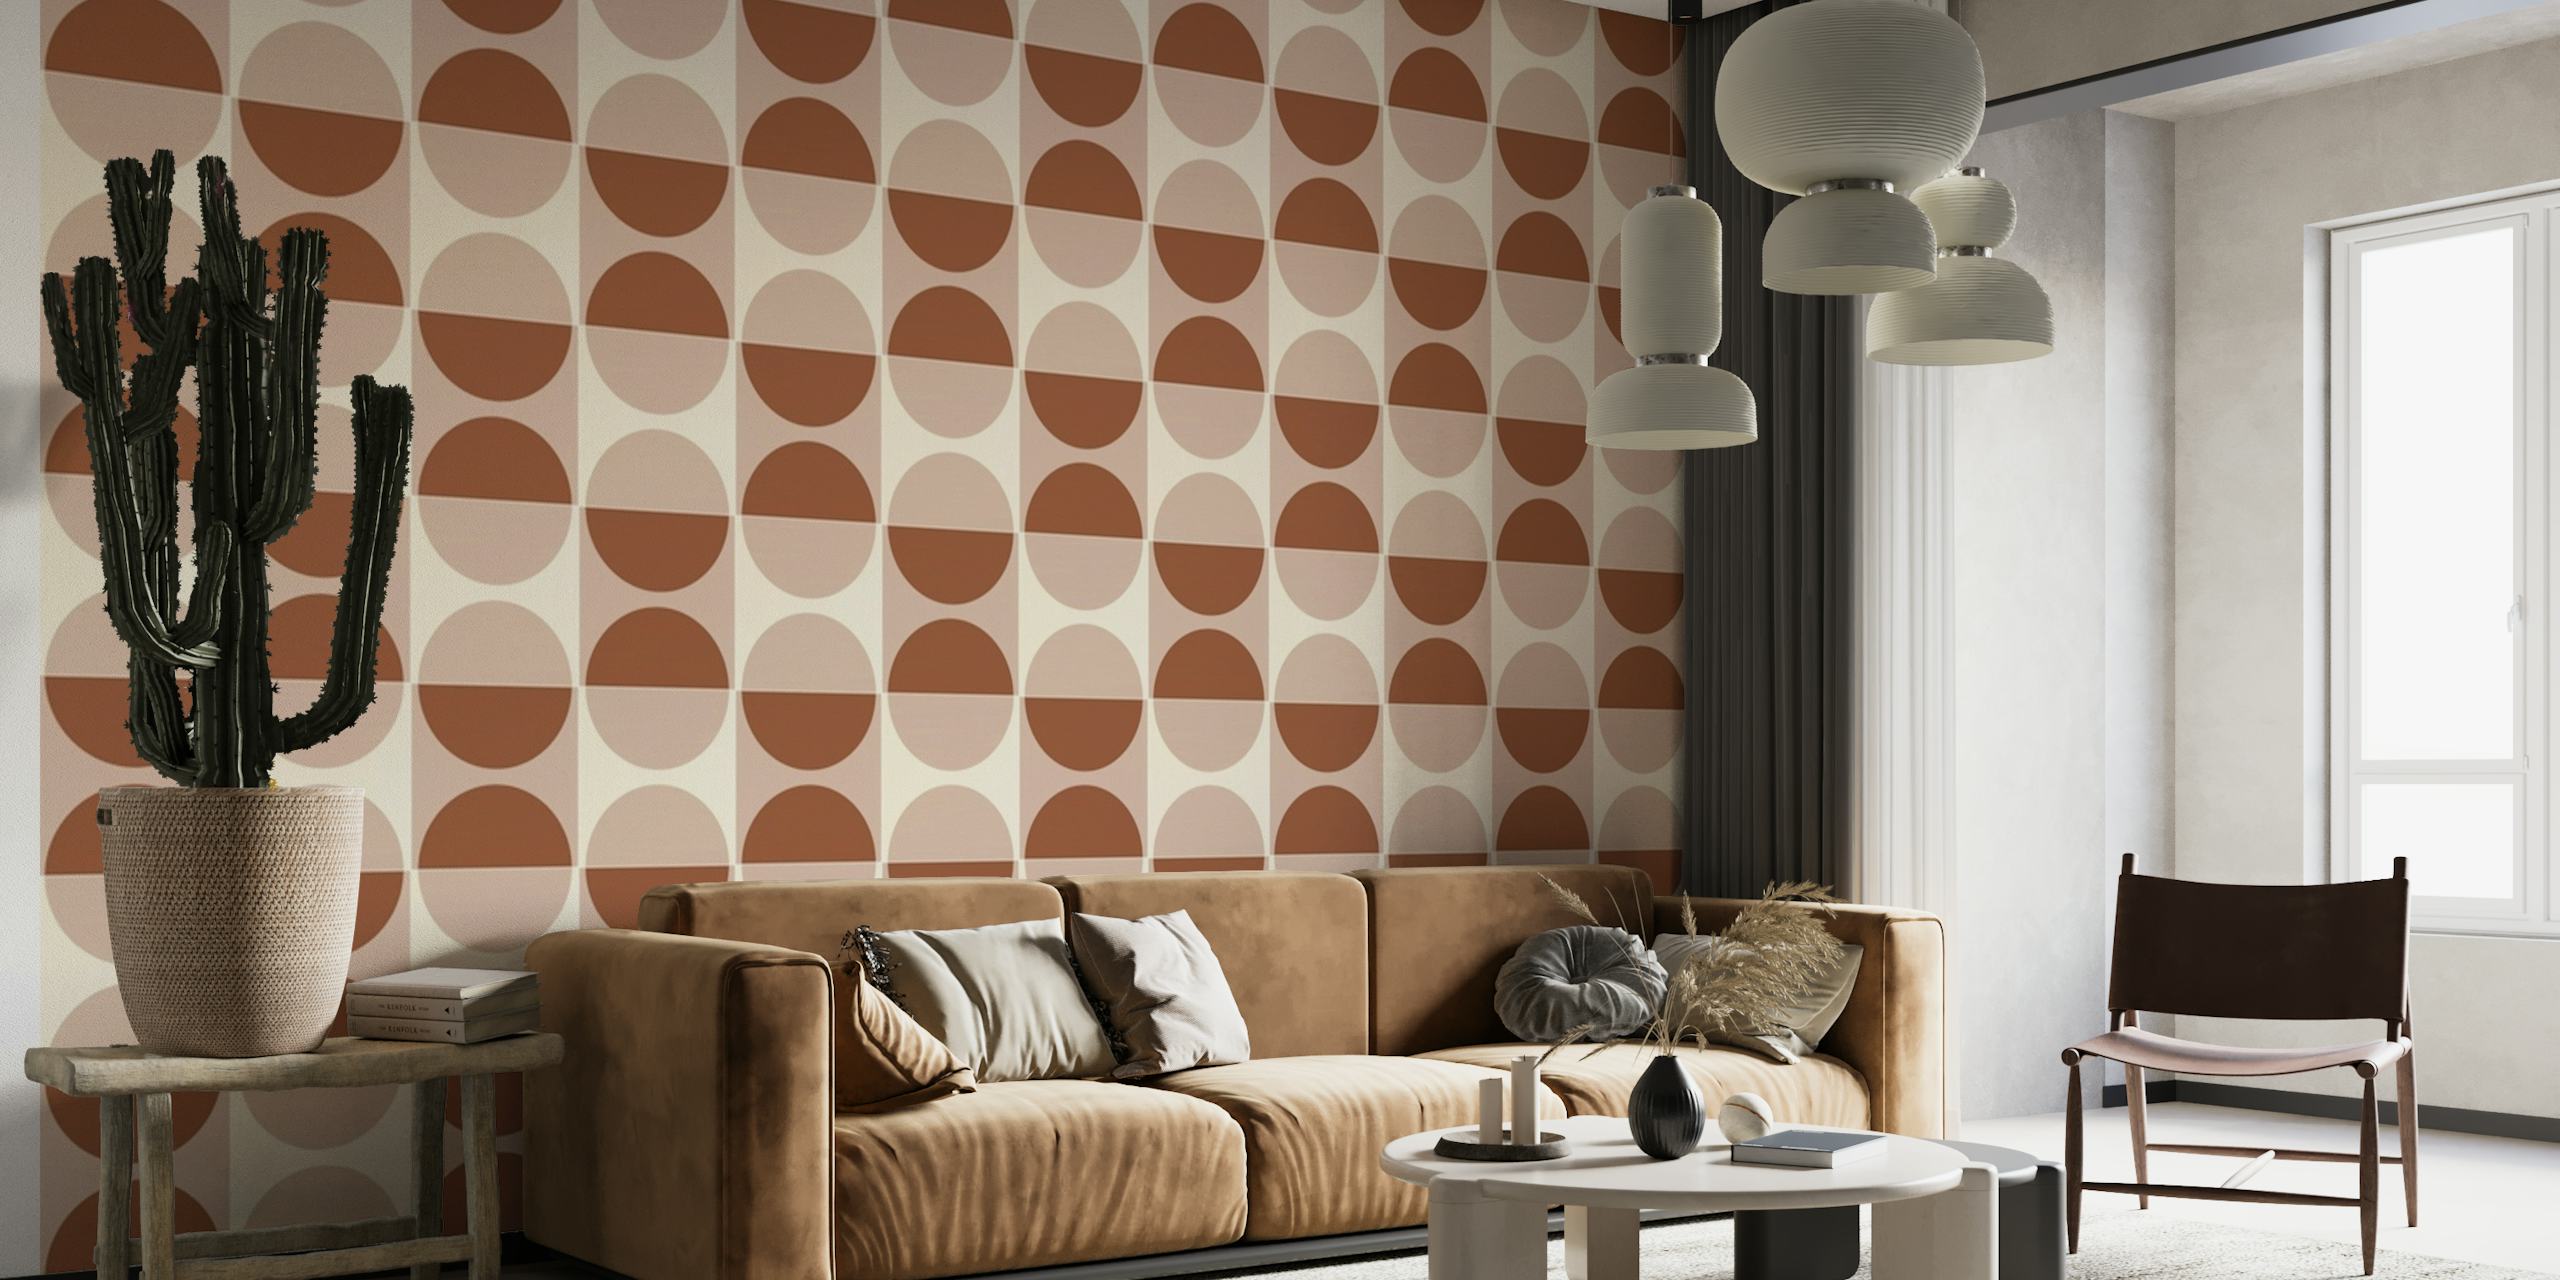 Painted Cotto Tiles Cinnamon and Powder tapet